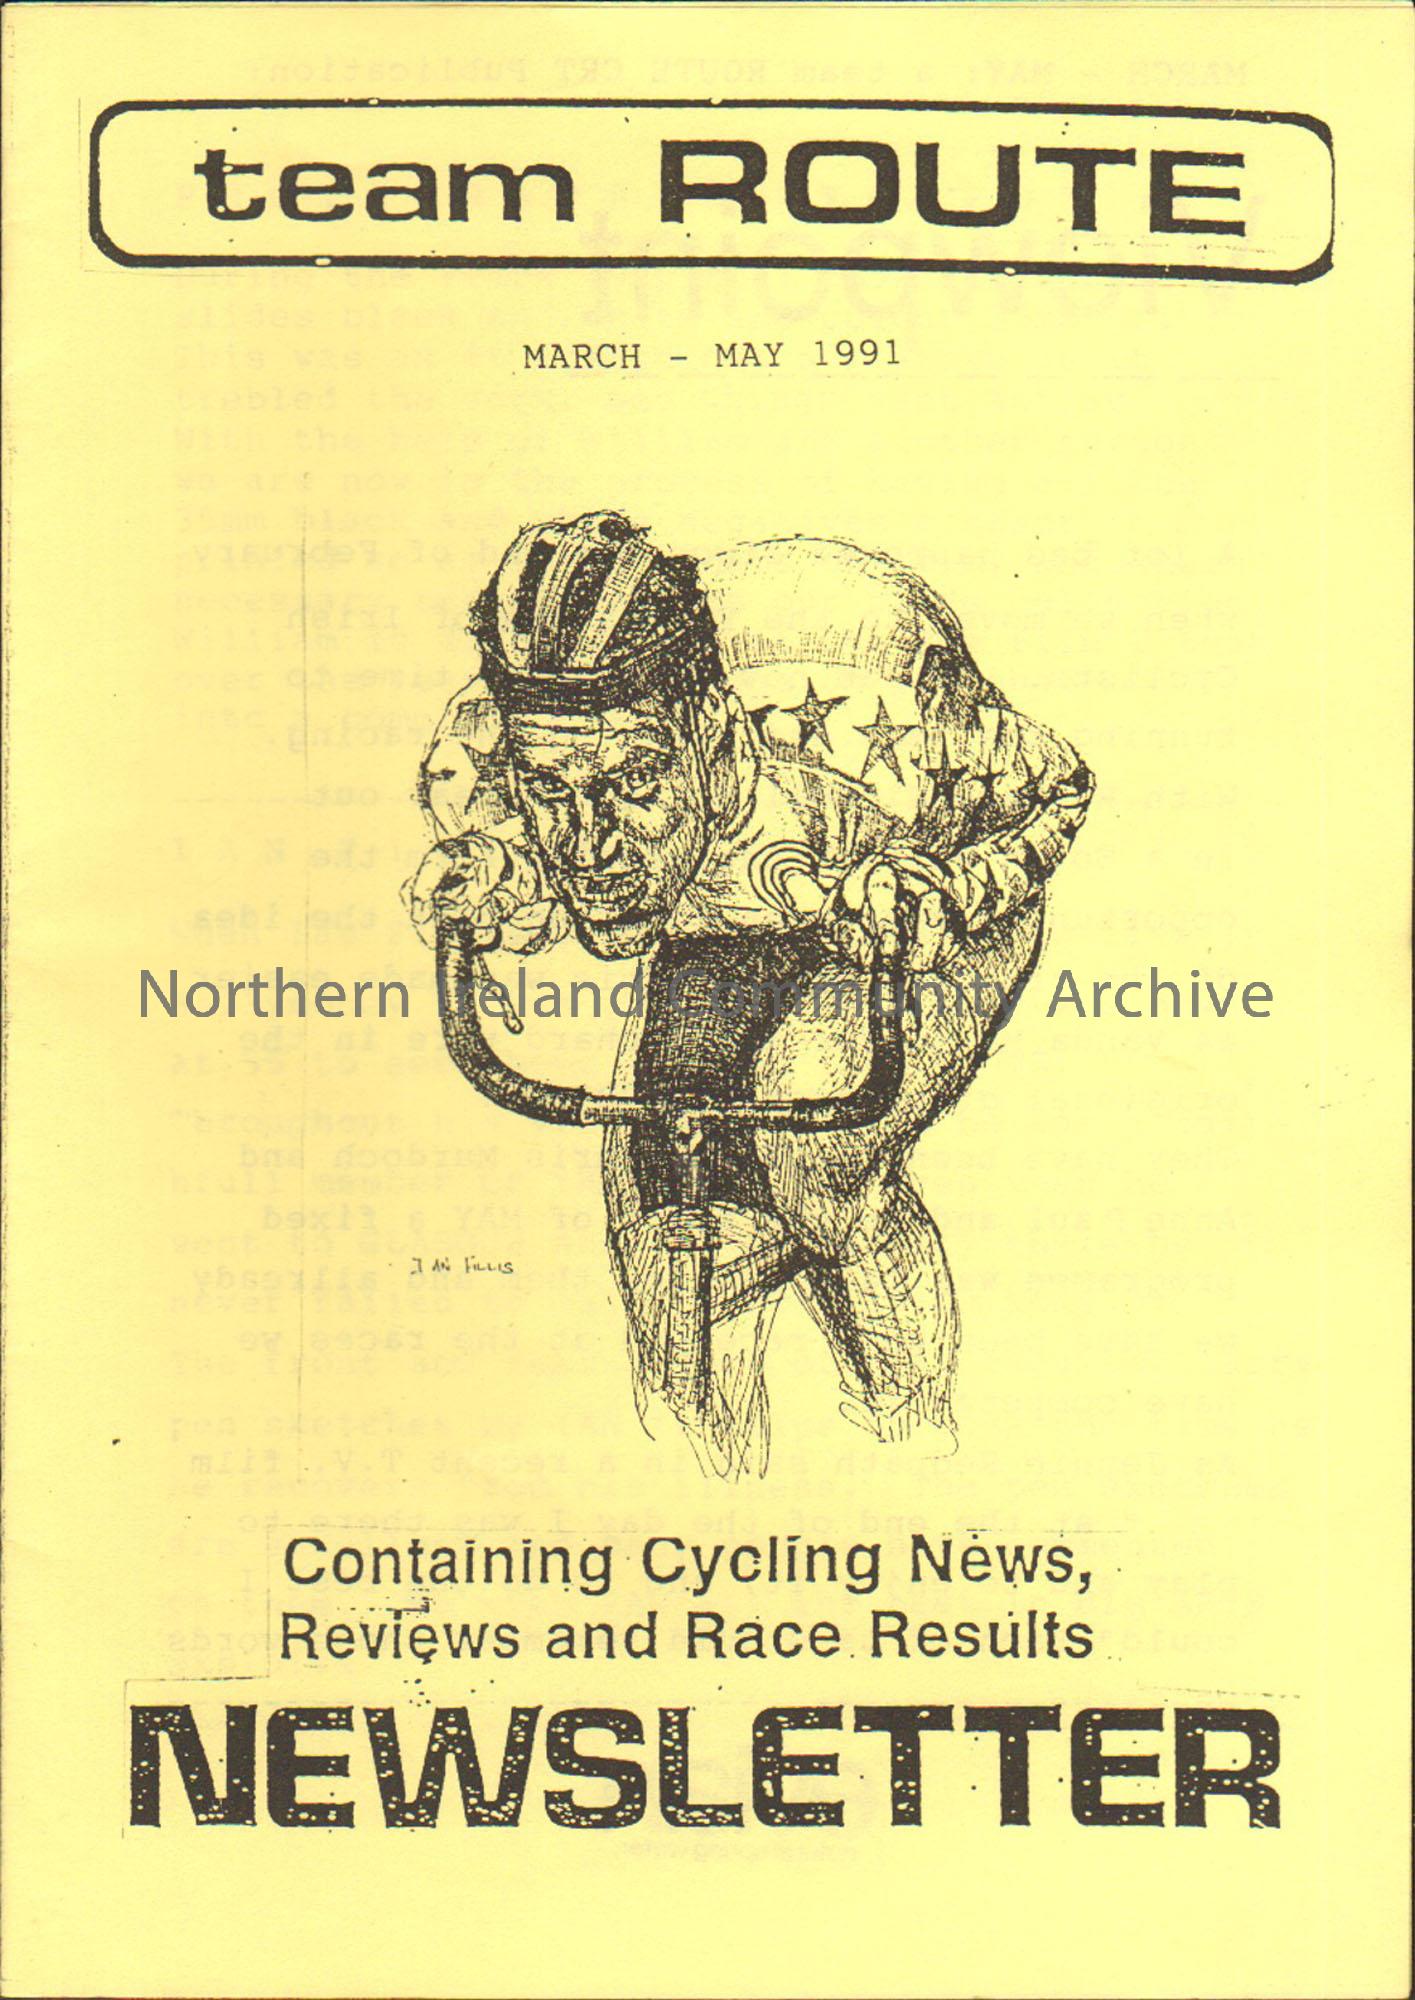 team Route Newsletter. Yellow leaflet with black and white drawing of a man cycling